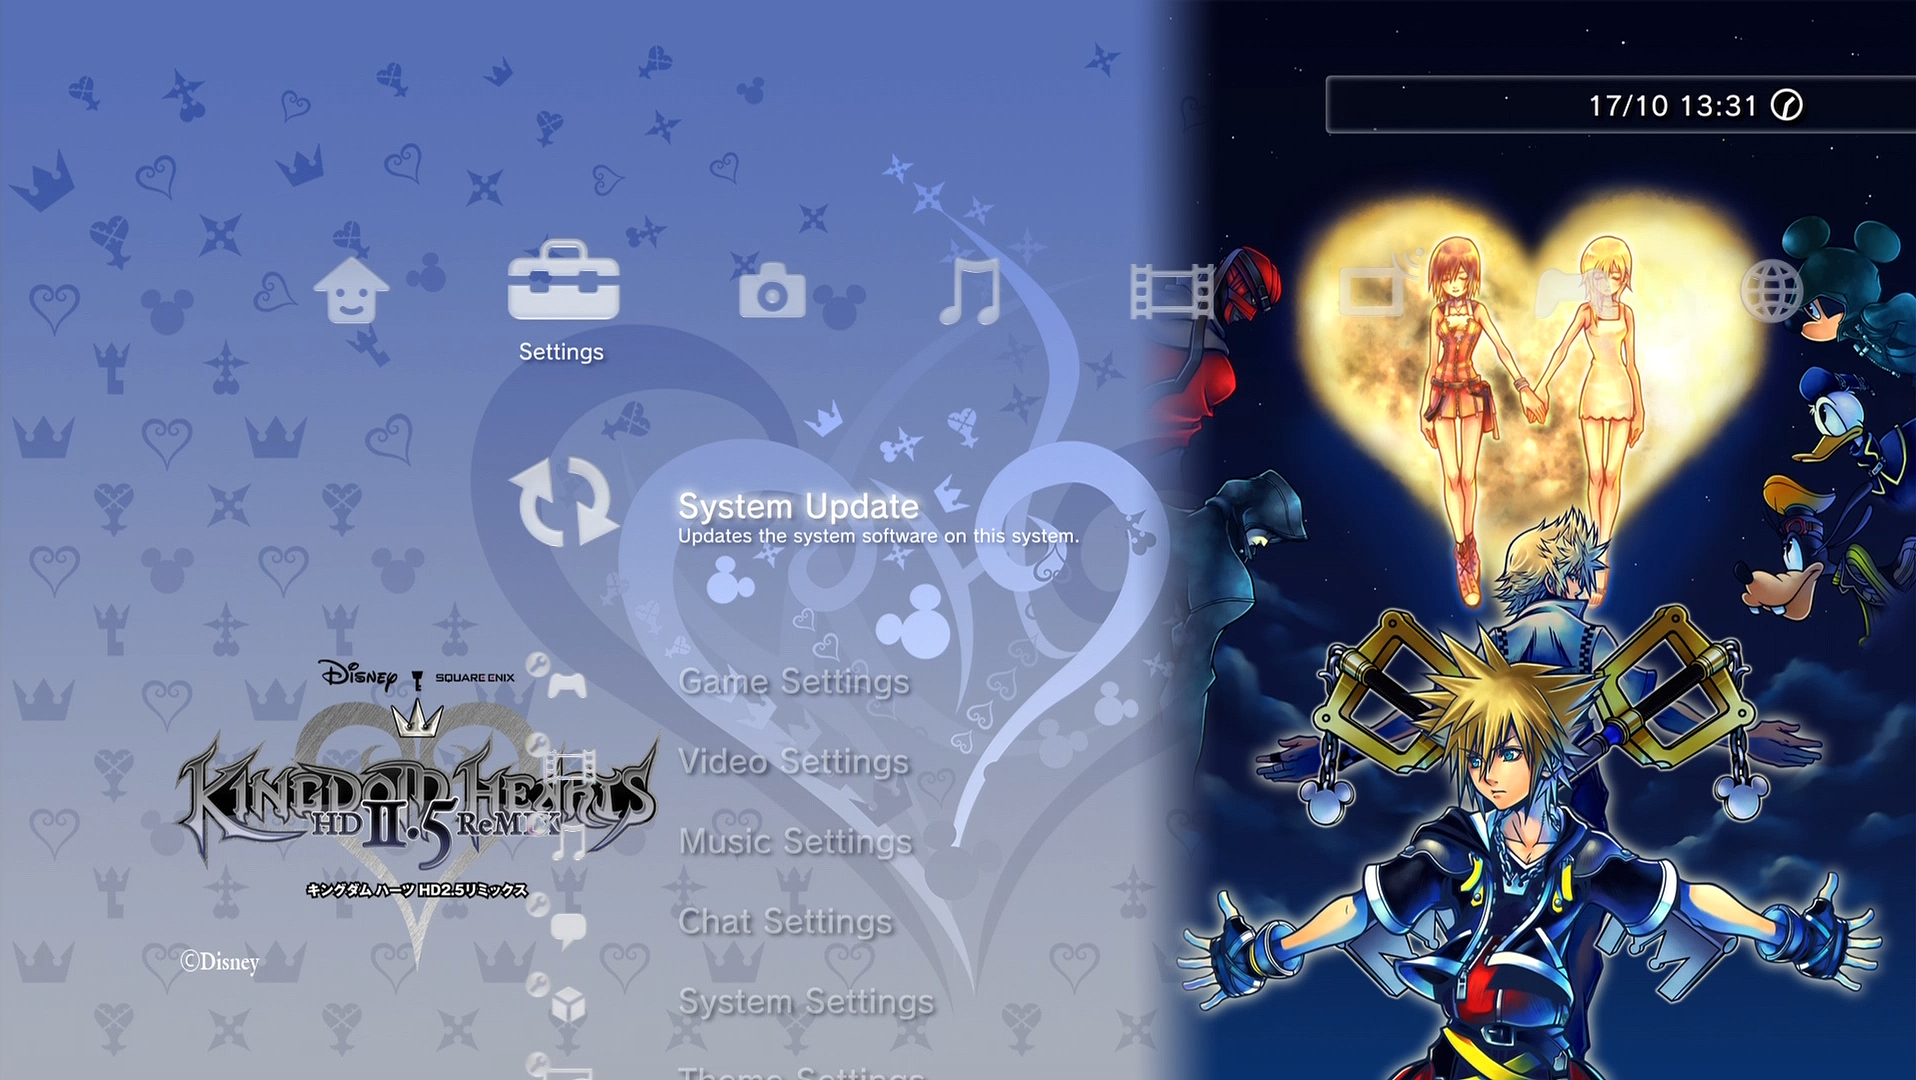 Here are the unlockable PlayStation 3 themes in Kingdom Hearts HD